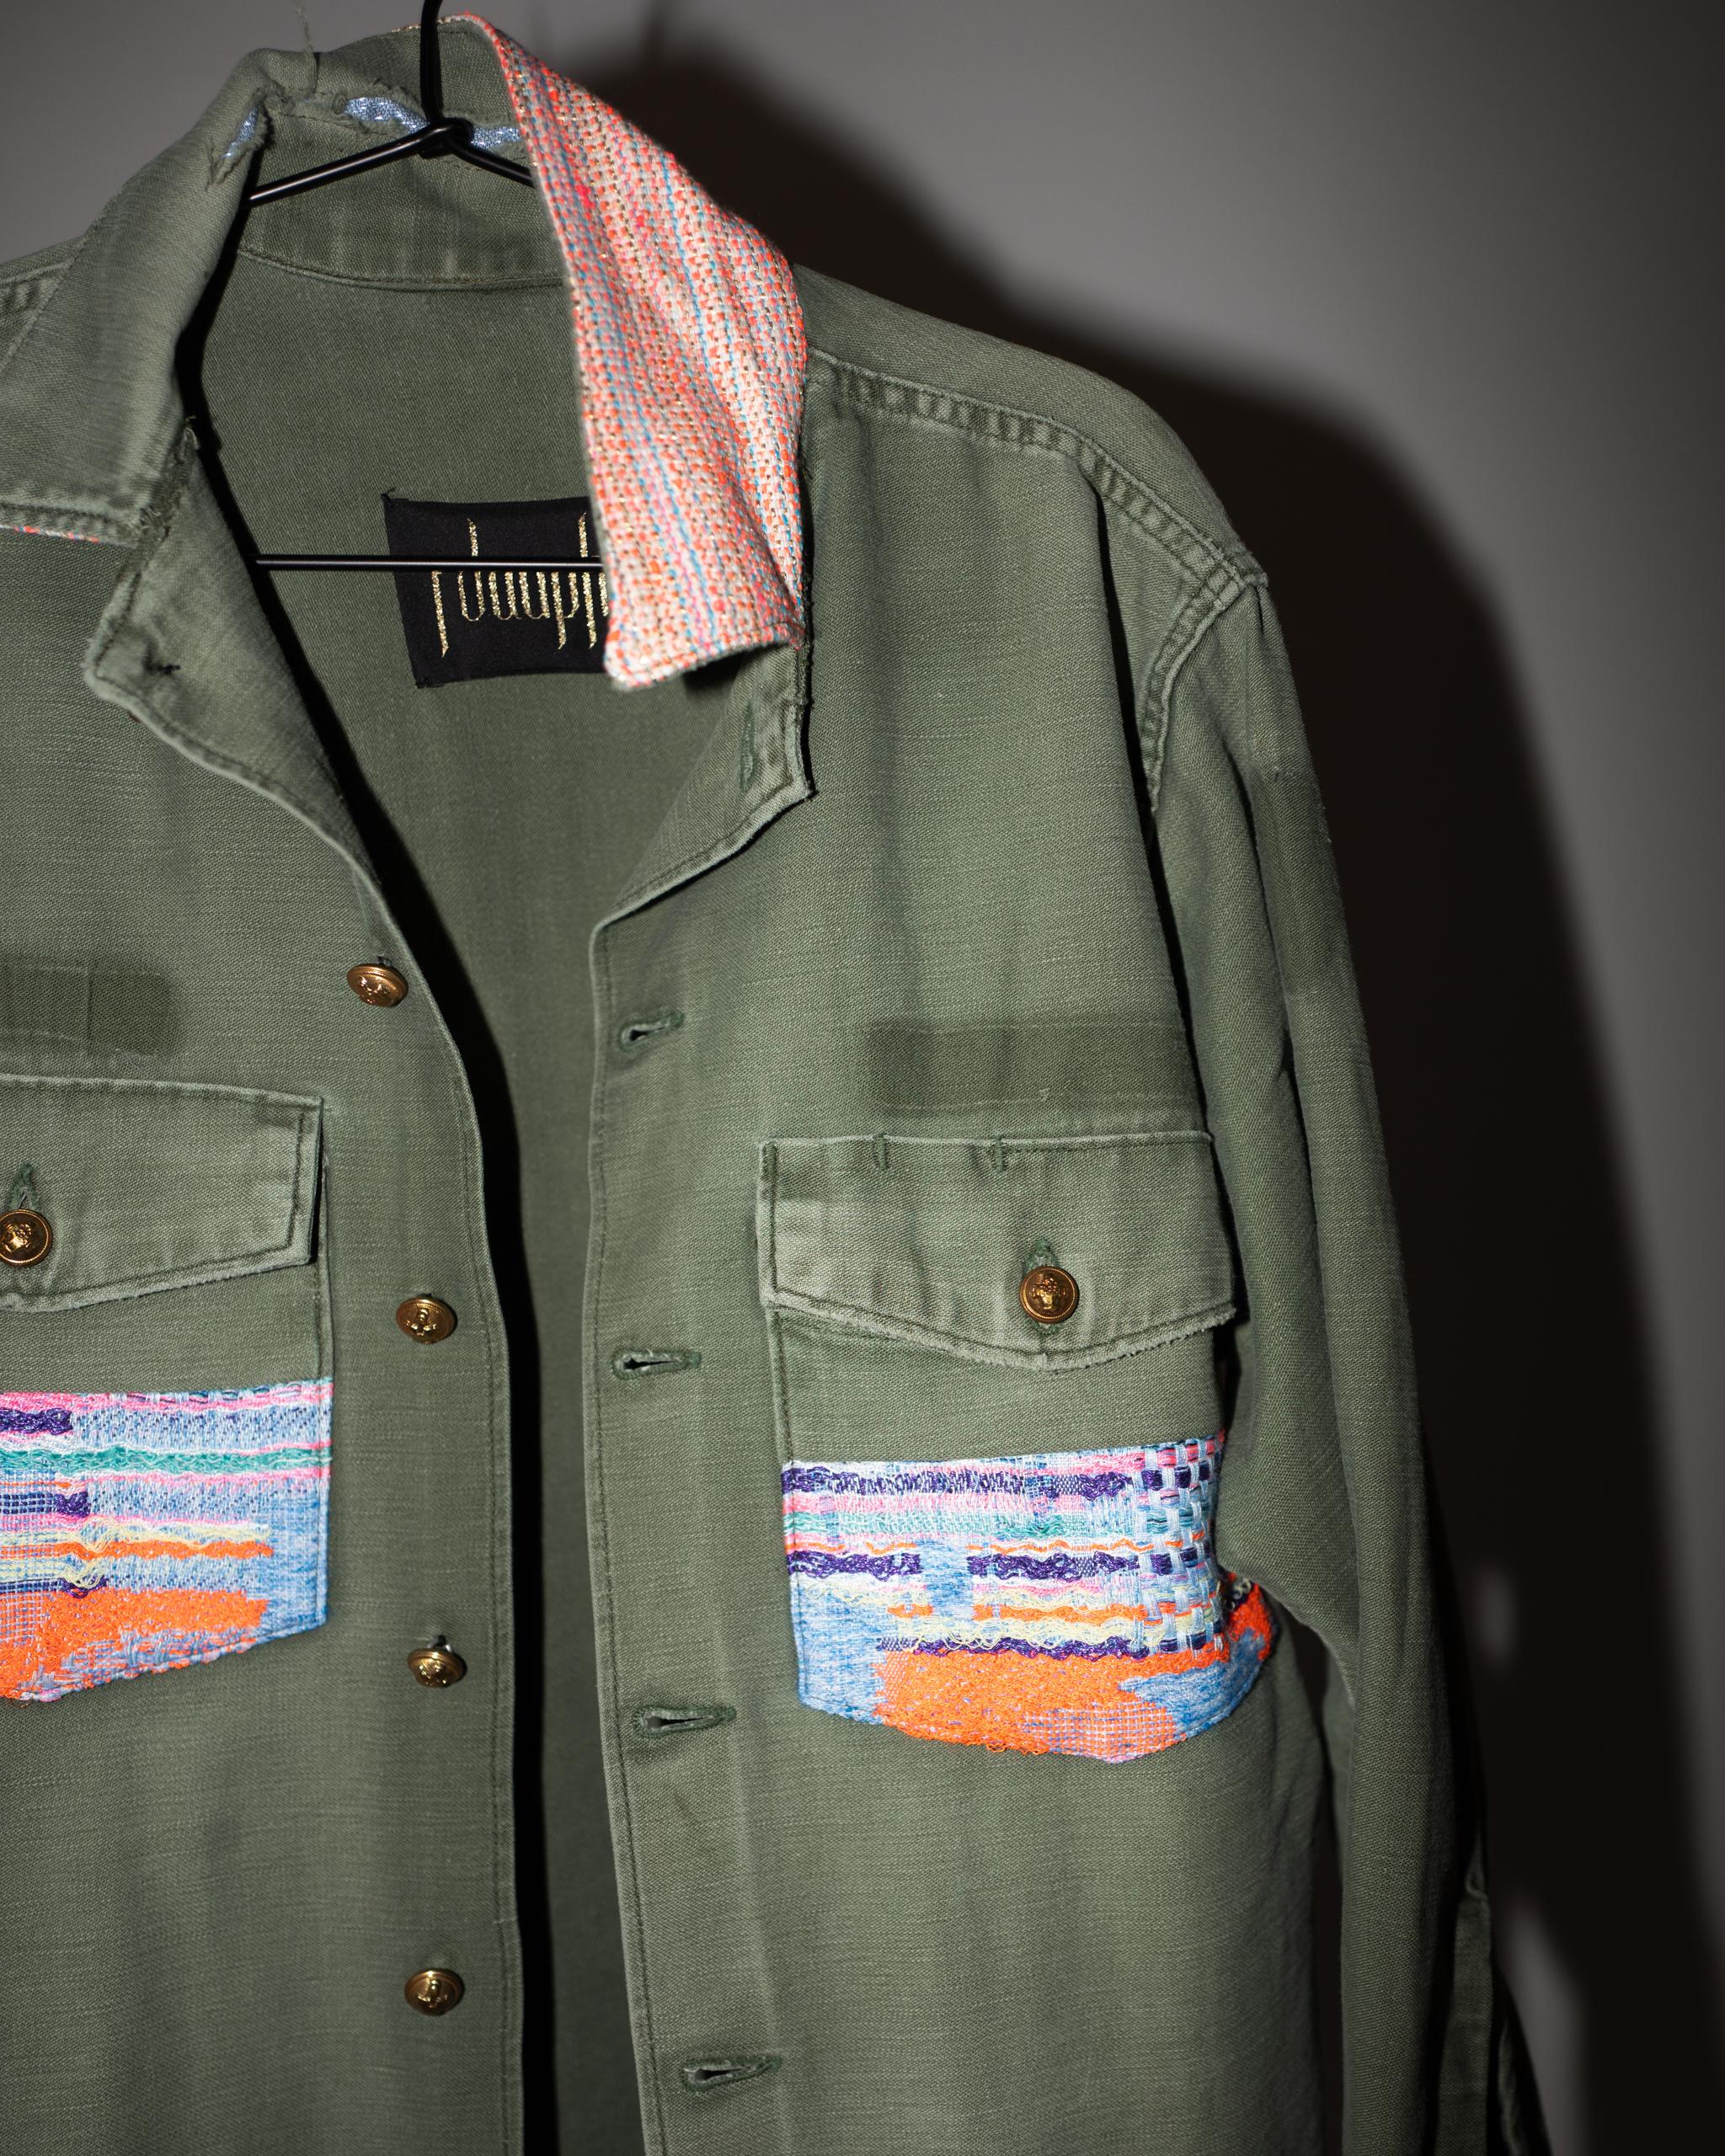 Vintage one of a kind distressed Green Military Jacket with Neon Pastel Pink Light Blue Orange Pockets and Collar,  Military Gold plated Brass Buttons from Paris
Designer: J Dauphin
Size: Medium
Sustainable Luxury, Up-cycled and Re-purposed